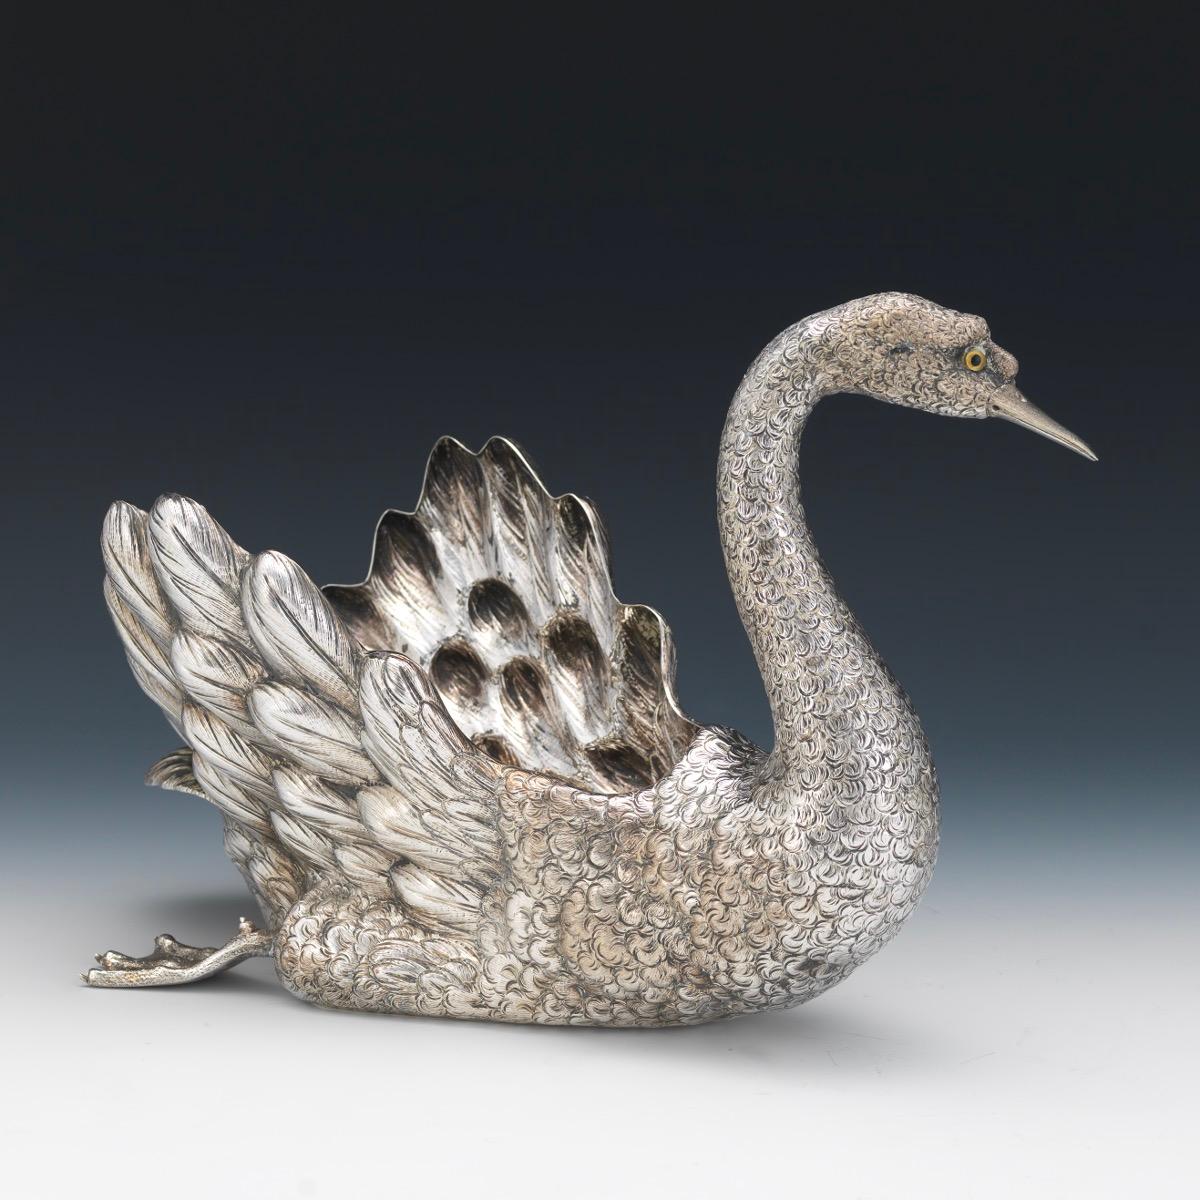 Buccellati Italy, a Large Sterling Silver Swan Centerpiece.

A large sterling silver swimming swan centerpiece bowl with textured finish, with scrolled neck and head and glass eyes.

Textured feathers beautifully delineated. Marked Buccellati,